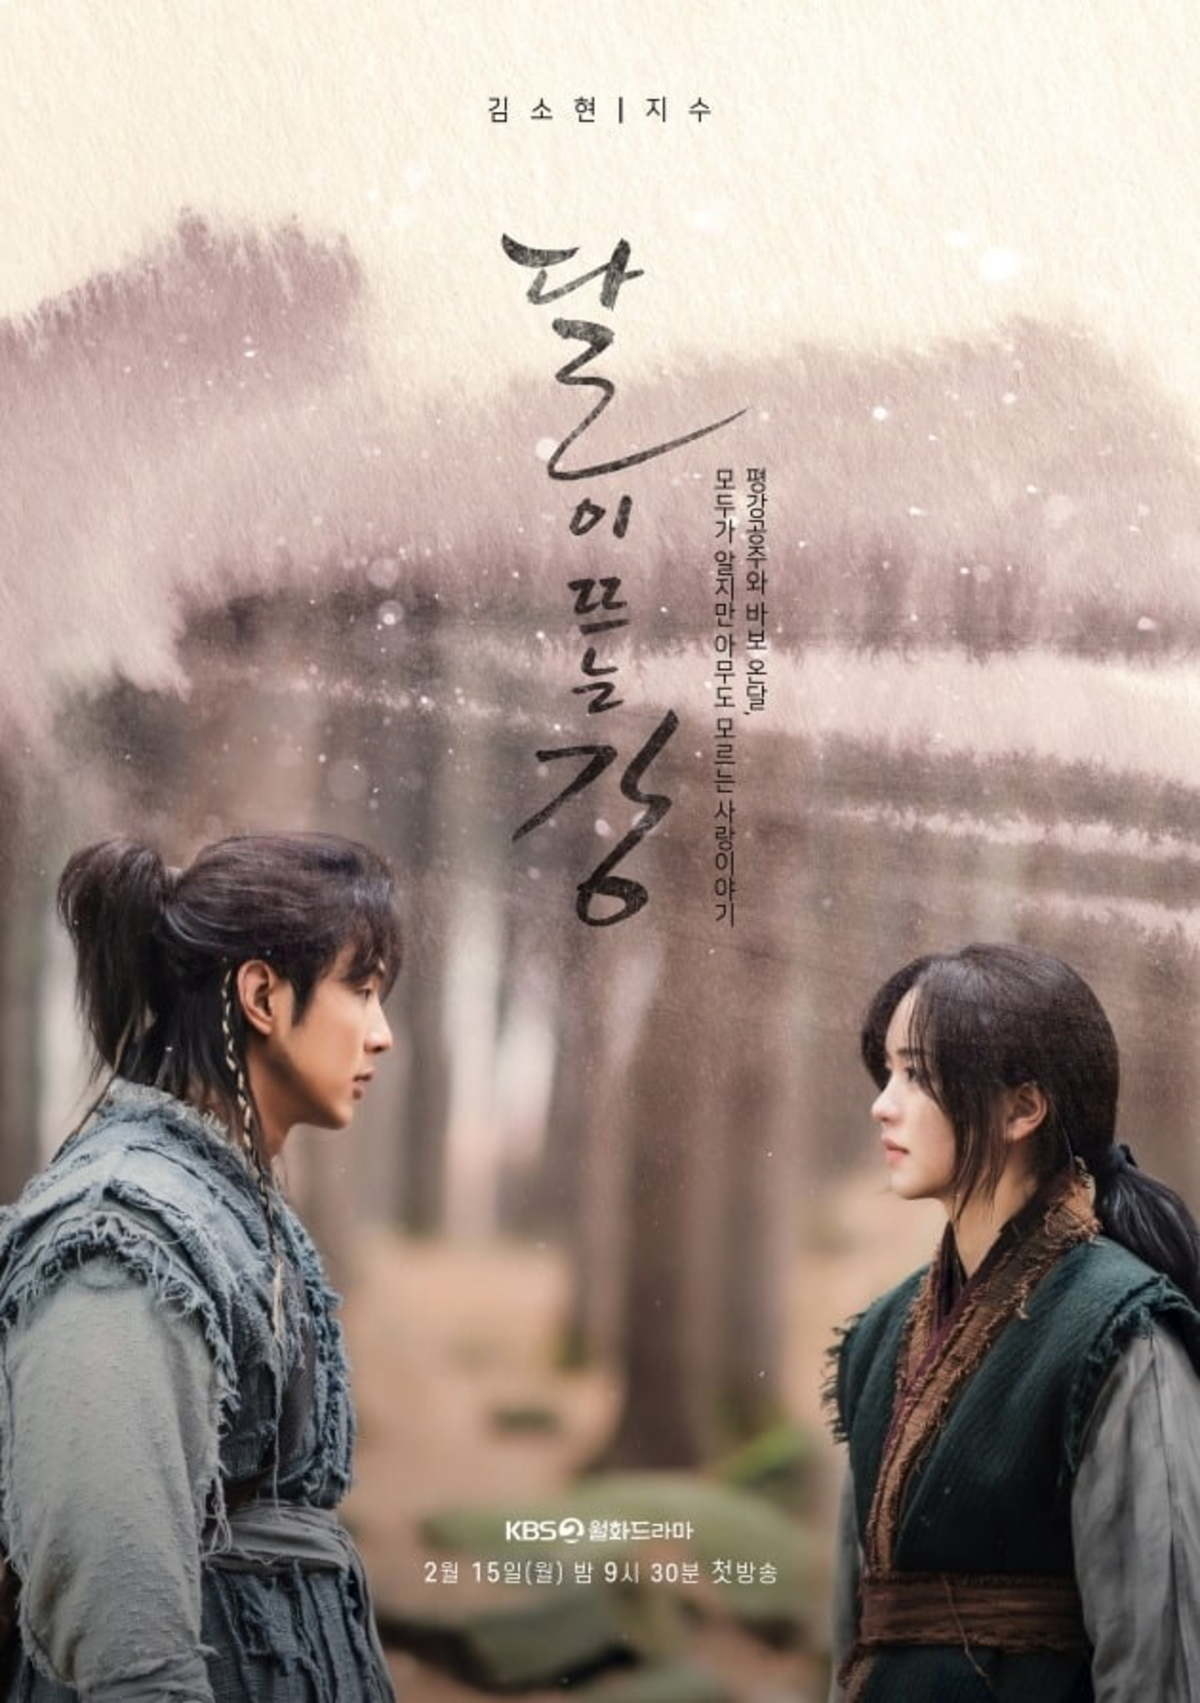 Ji Soo and Kim So Hyun look at each other in the poster for River Where the Moon Rises